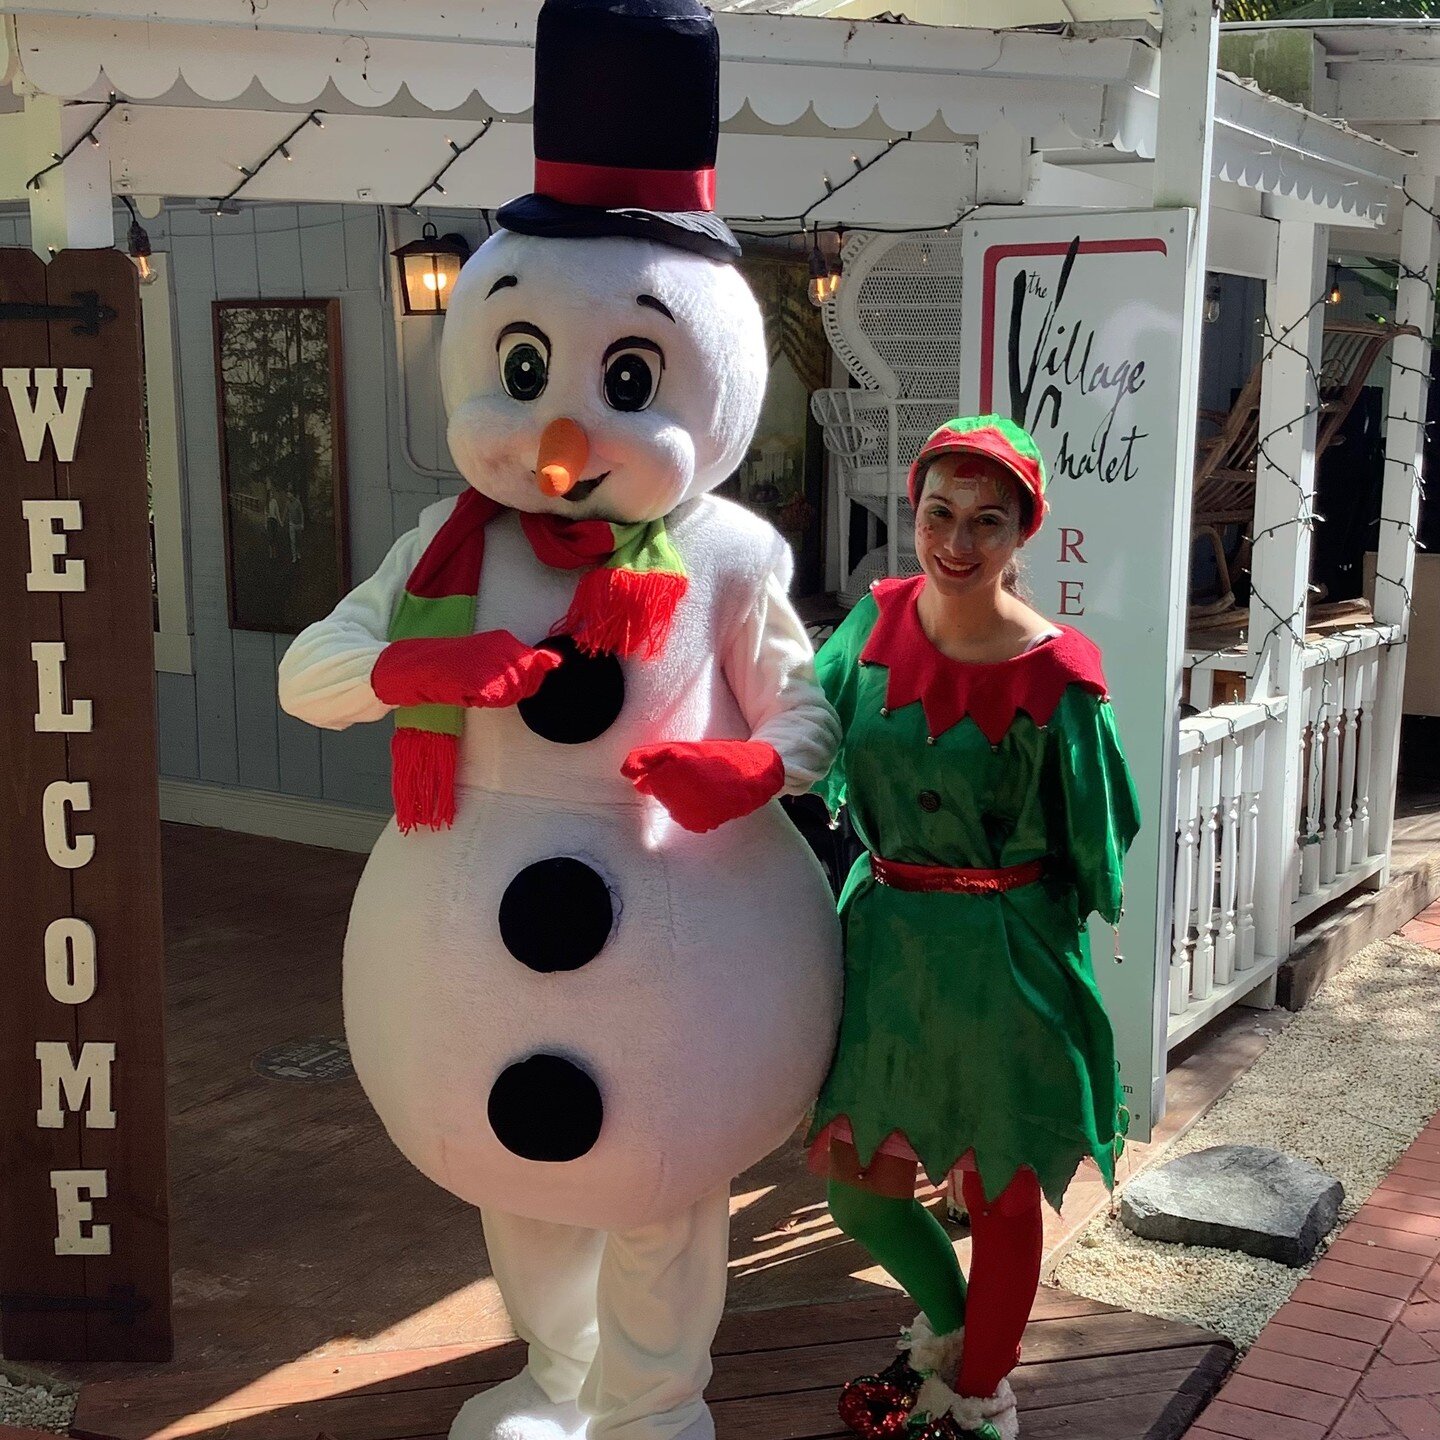 Frosty the Snowman stopped by The Village Chalet today @cauleysquare along with one of Santa&rsquo;s helpers! 

Christmas in Cauley Square🎄☃️

#christmas #frosty #southmiami #homestead #lunch #christmasinthesouth #outsidedining